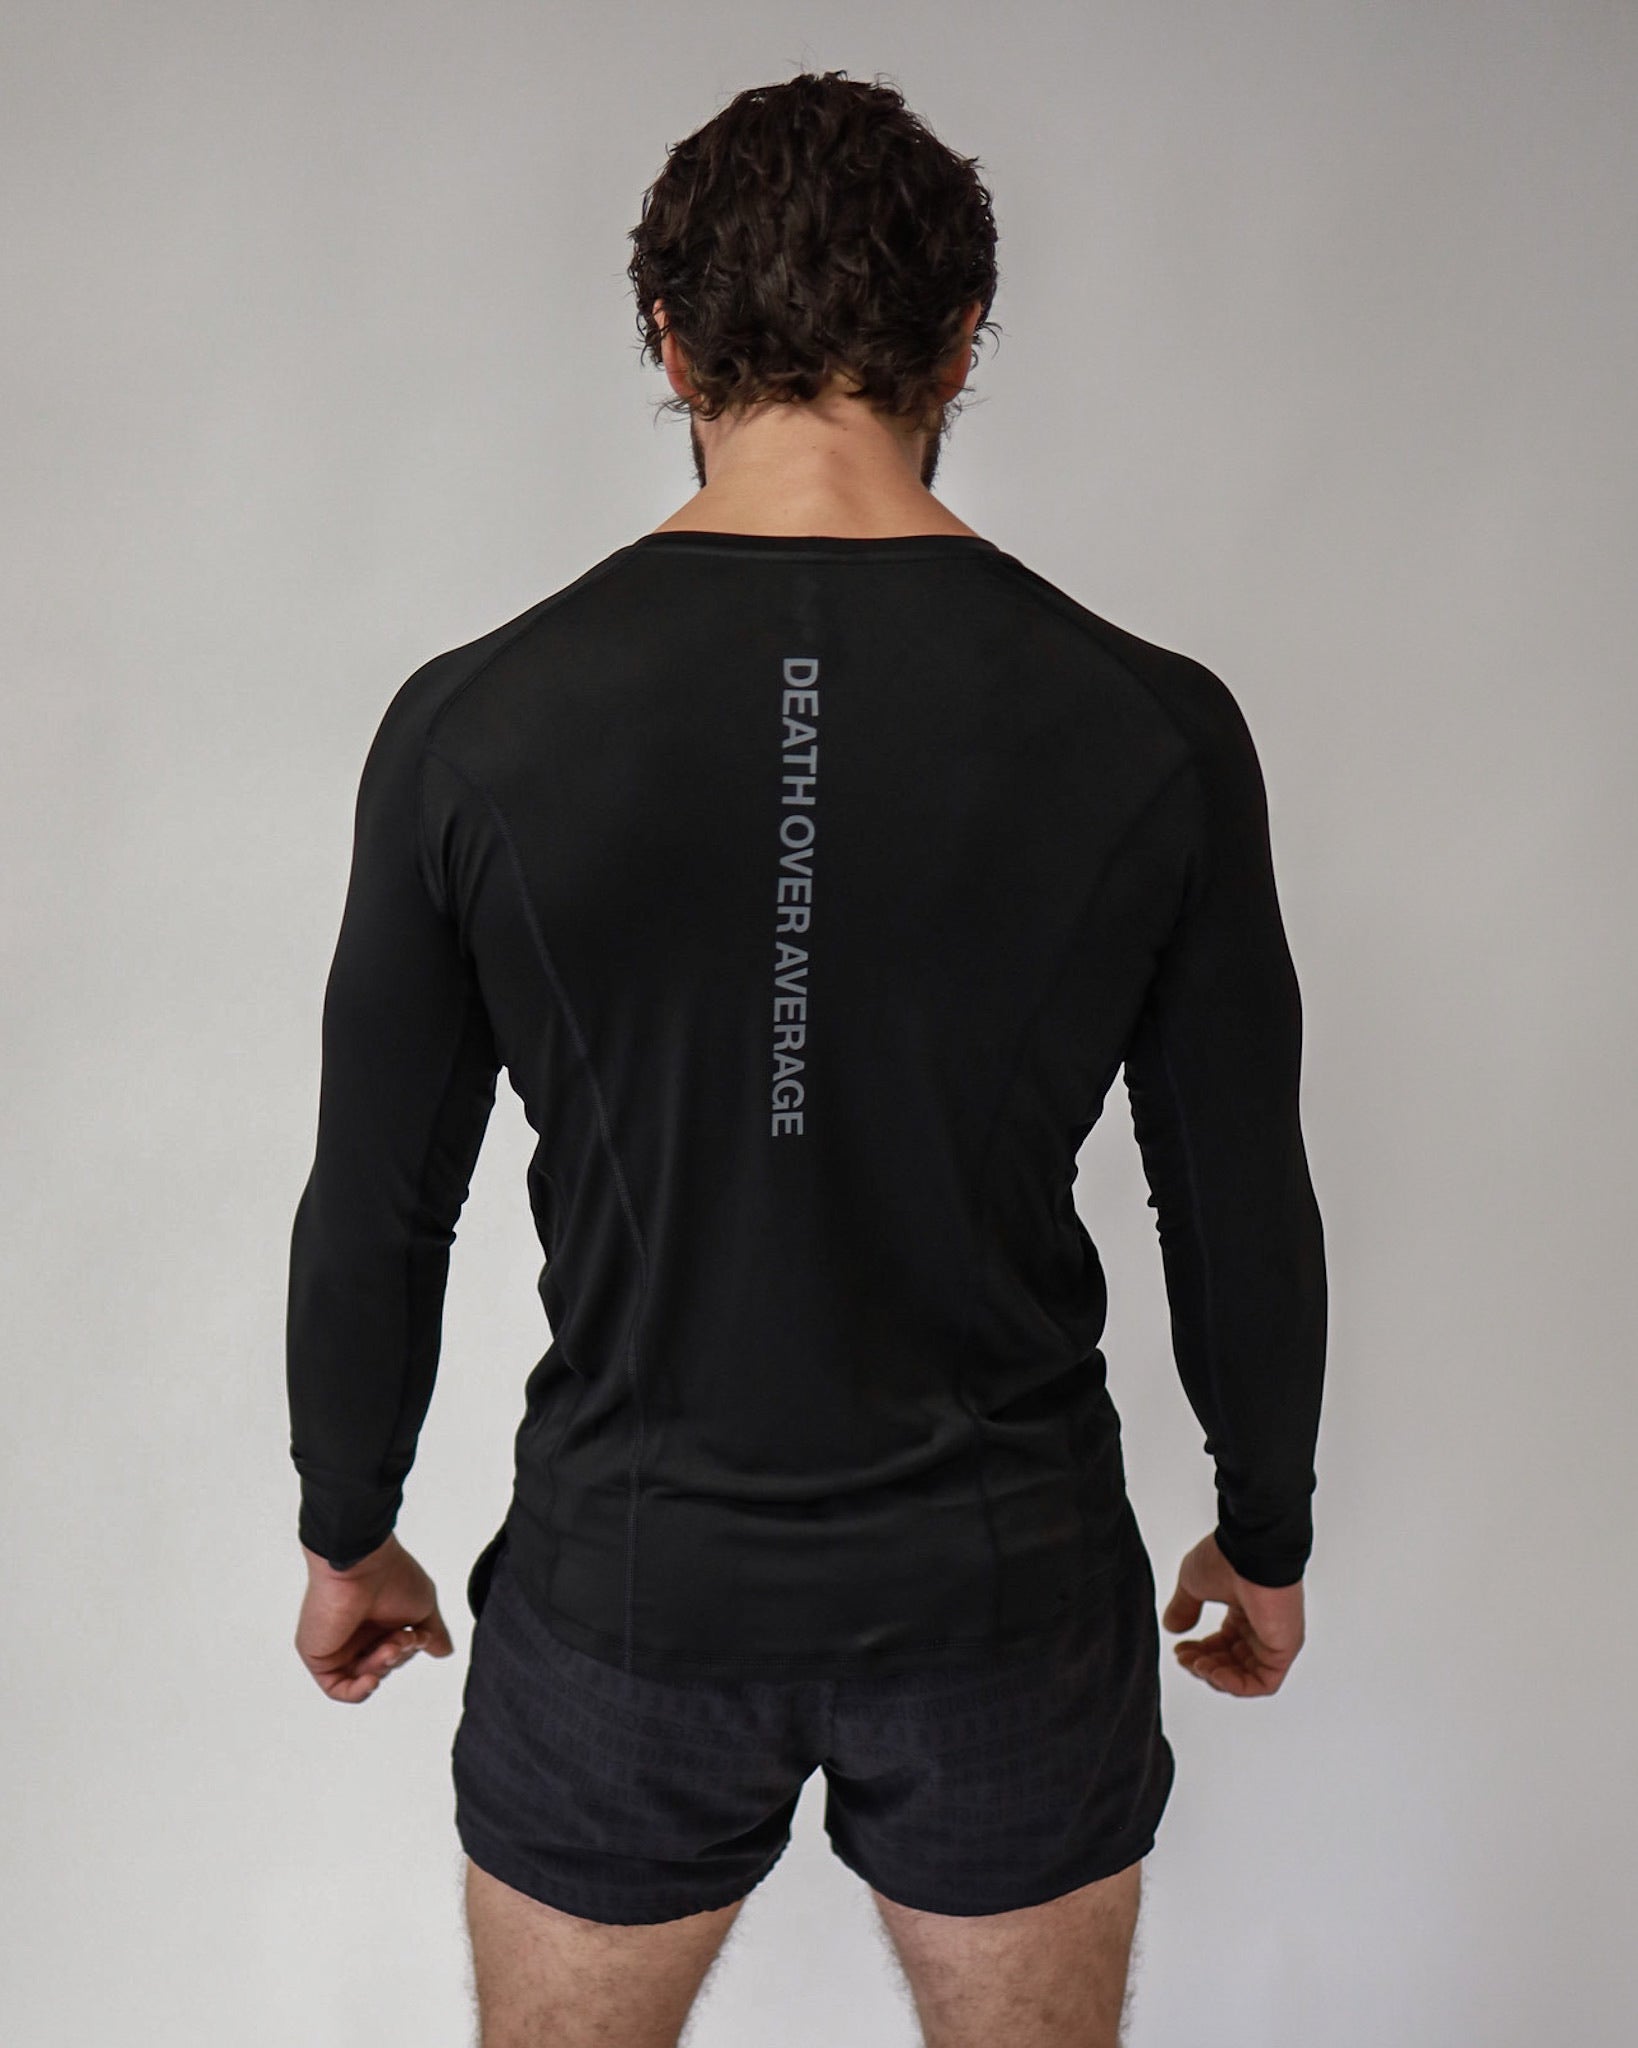 Pro-Tech V1 Athletic Fitted Long Sleeve Tee - Black